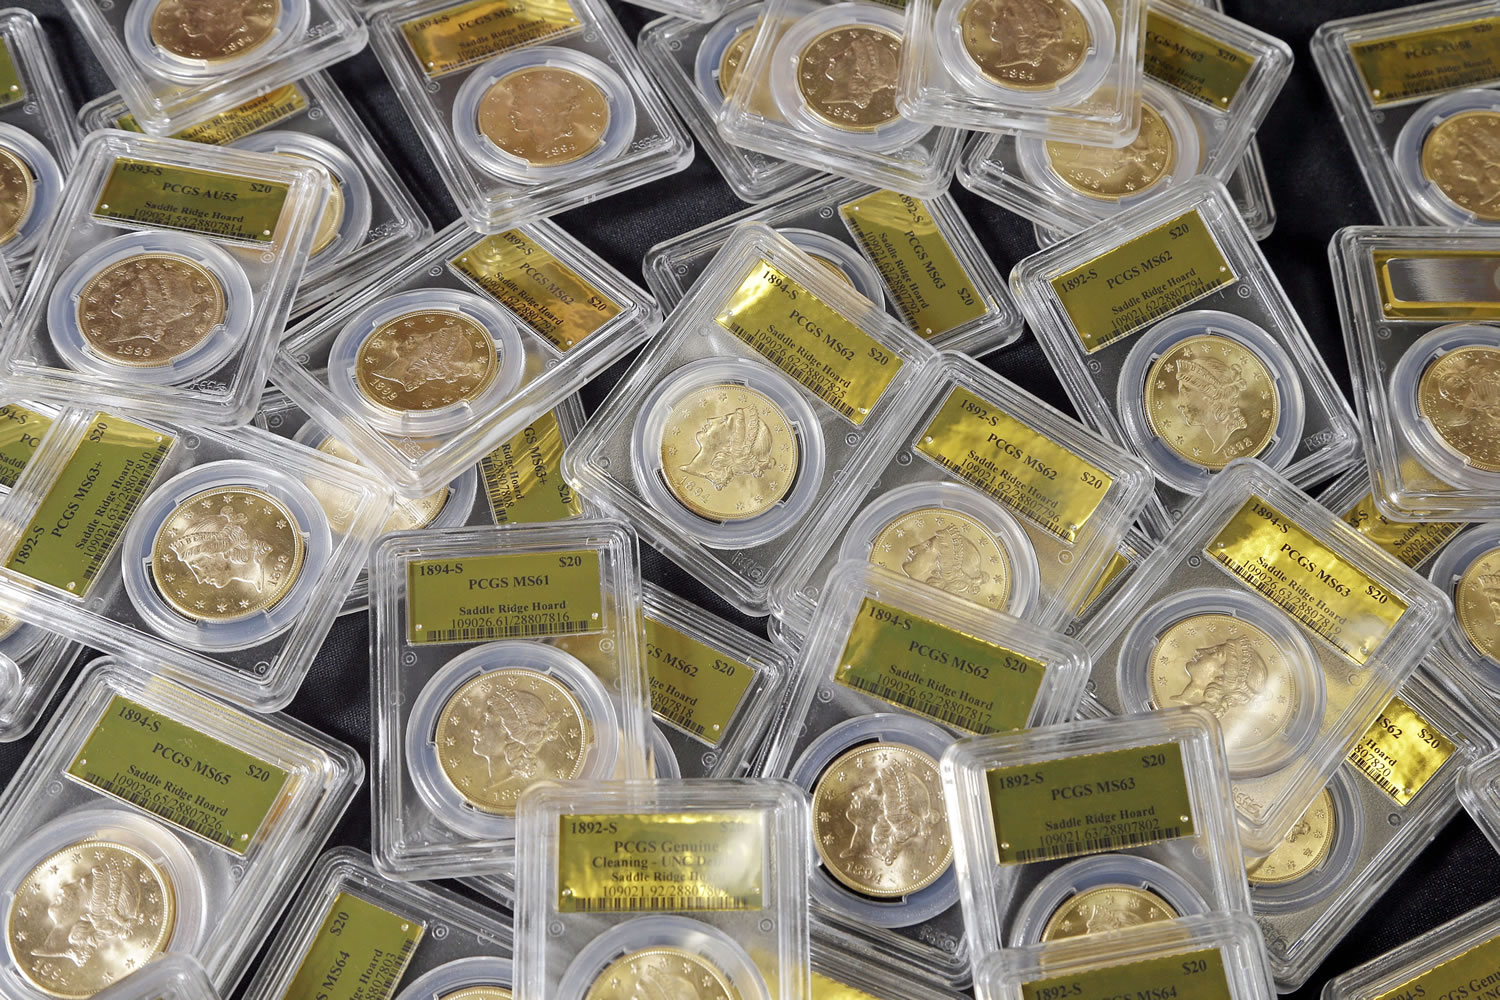 Associated Press files
Some of the 1,427 Gold-Rush-era U.S. gold coins discovered by a couple out walking their dog are shown in February.